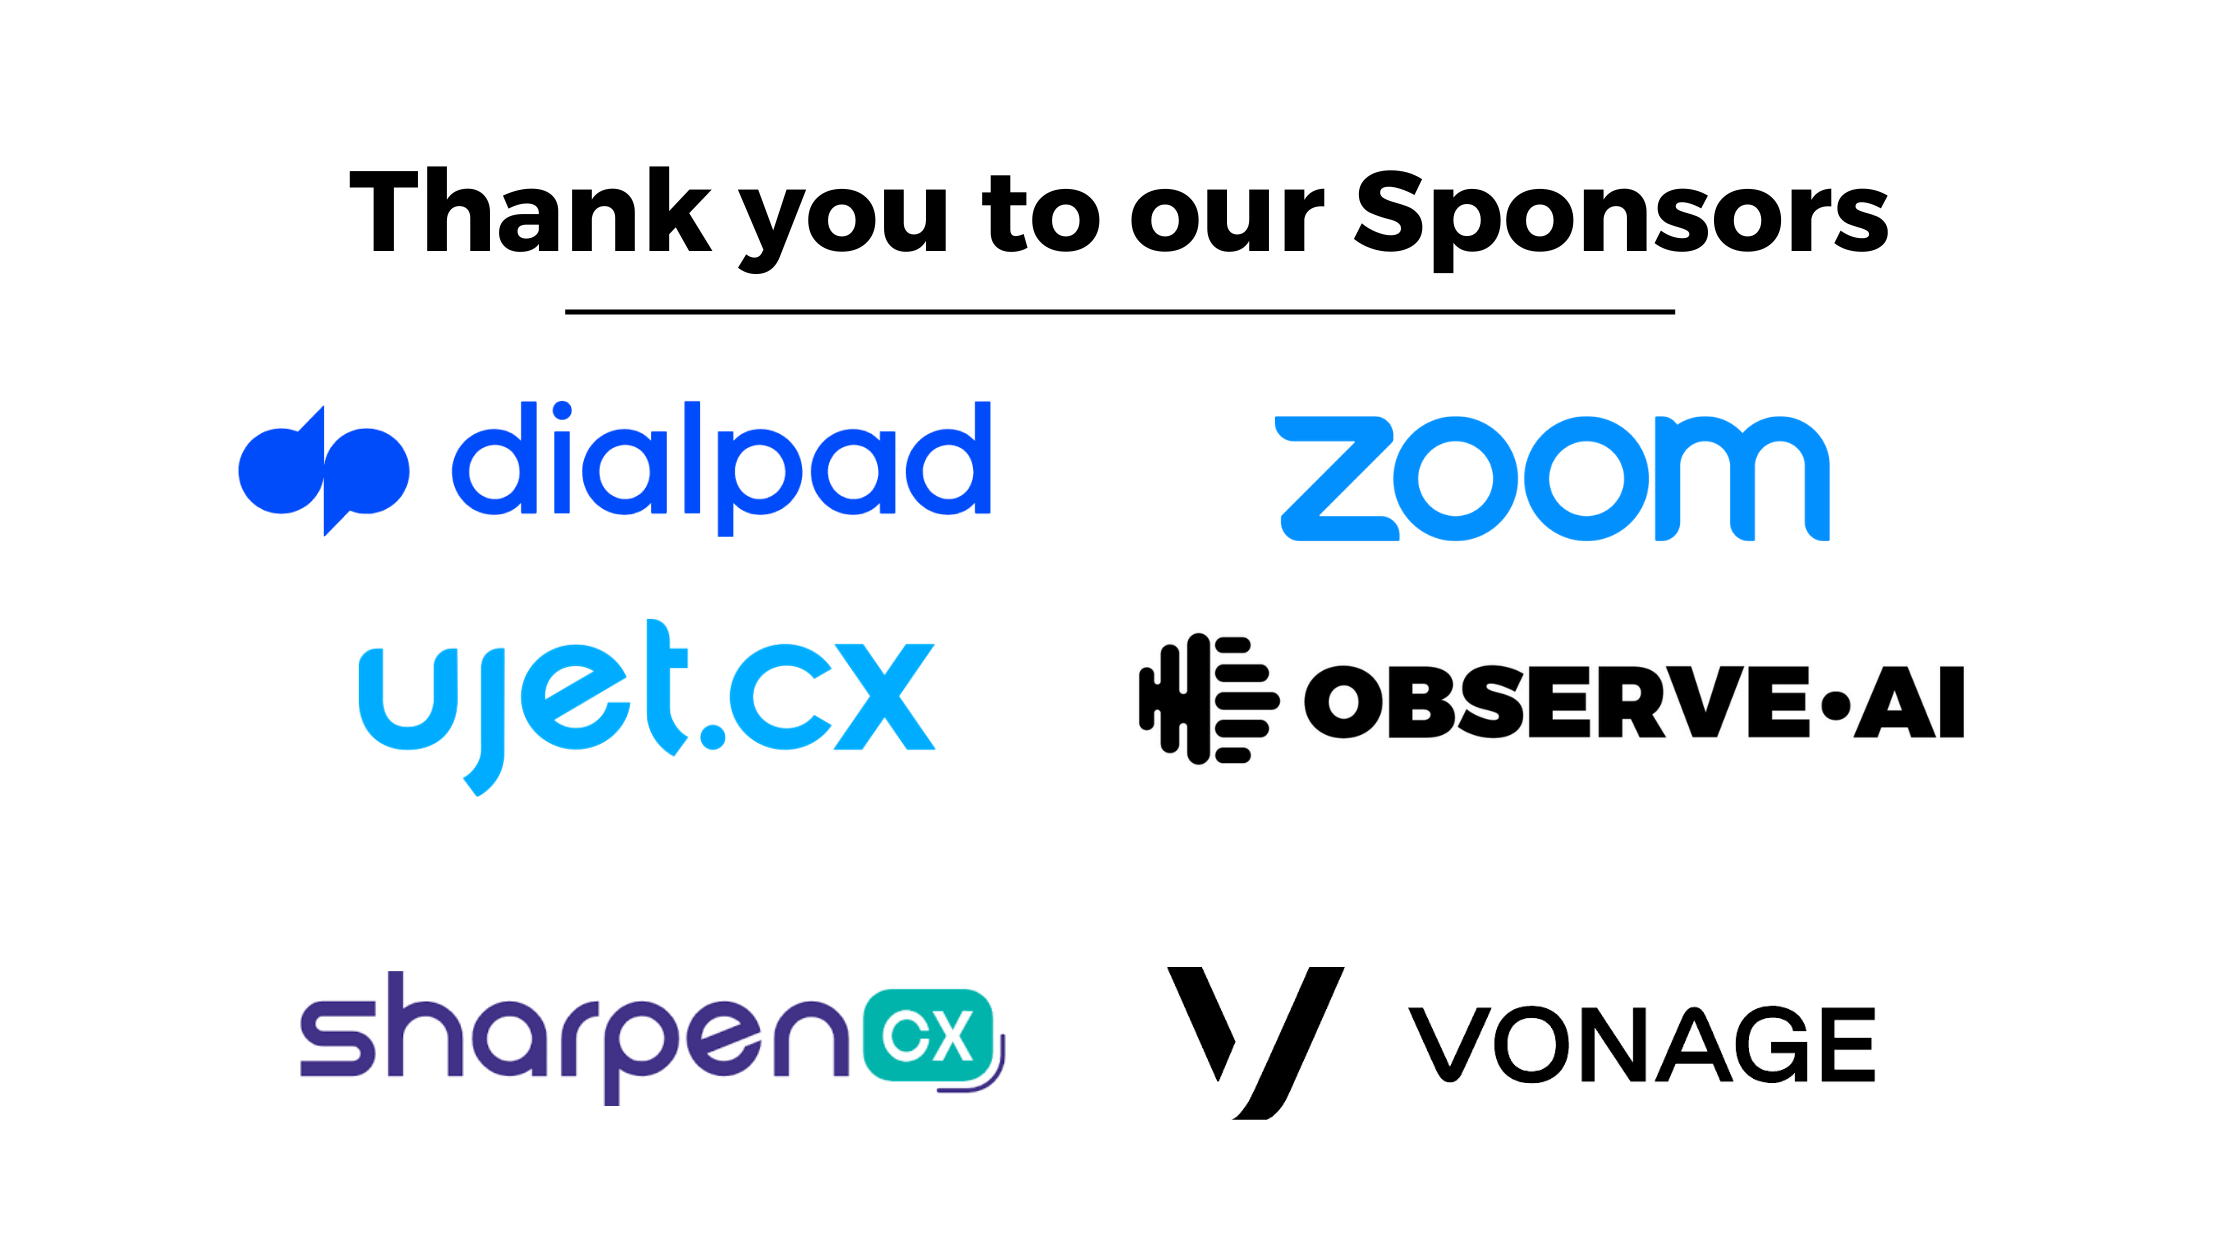 Thank you to our Sponsors (19)